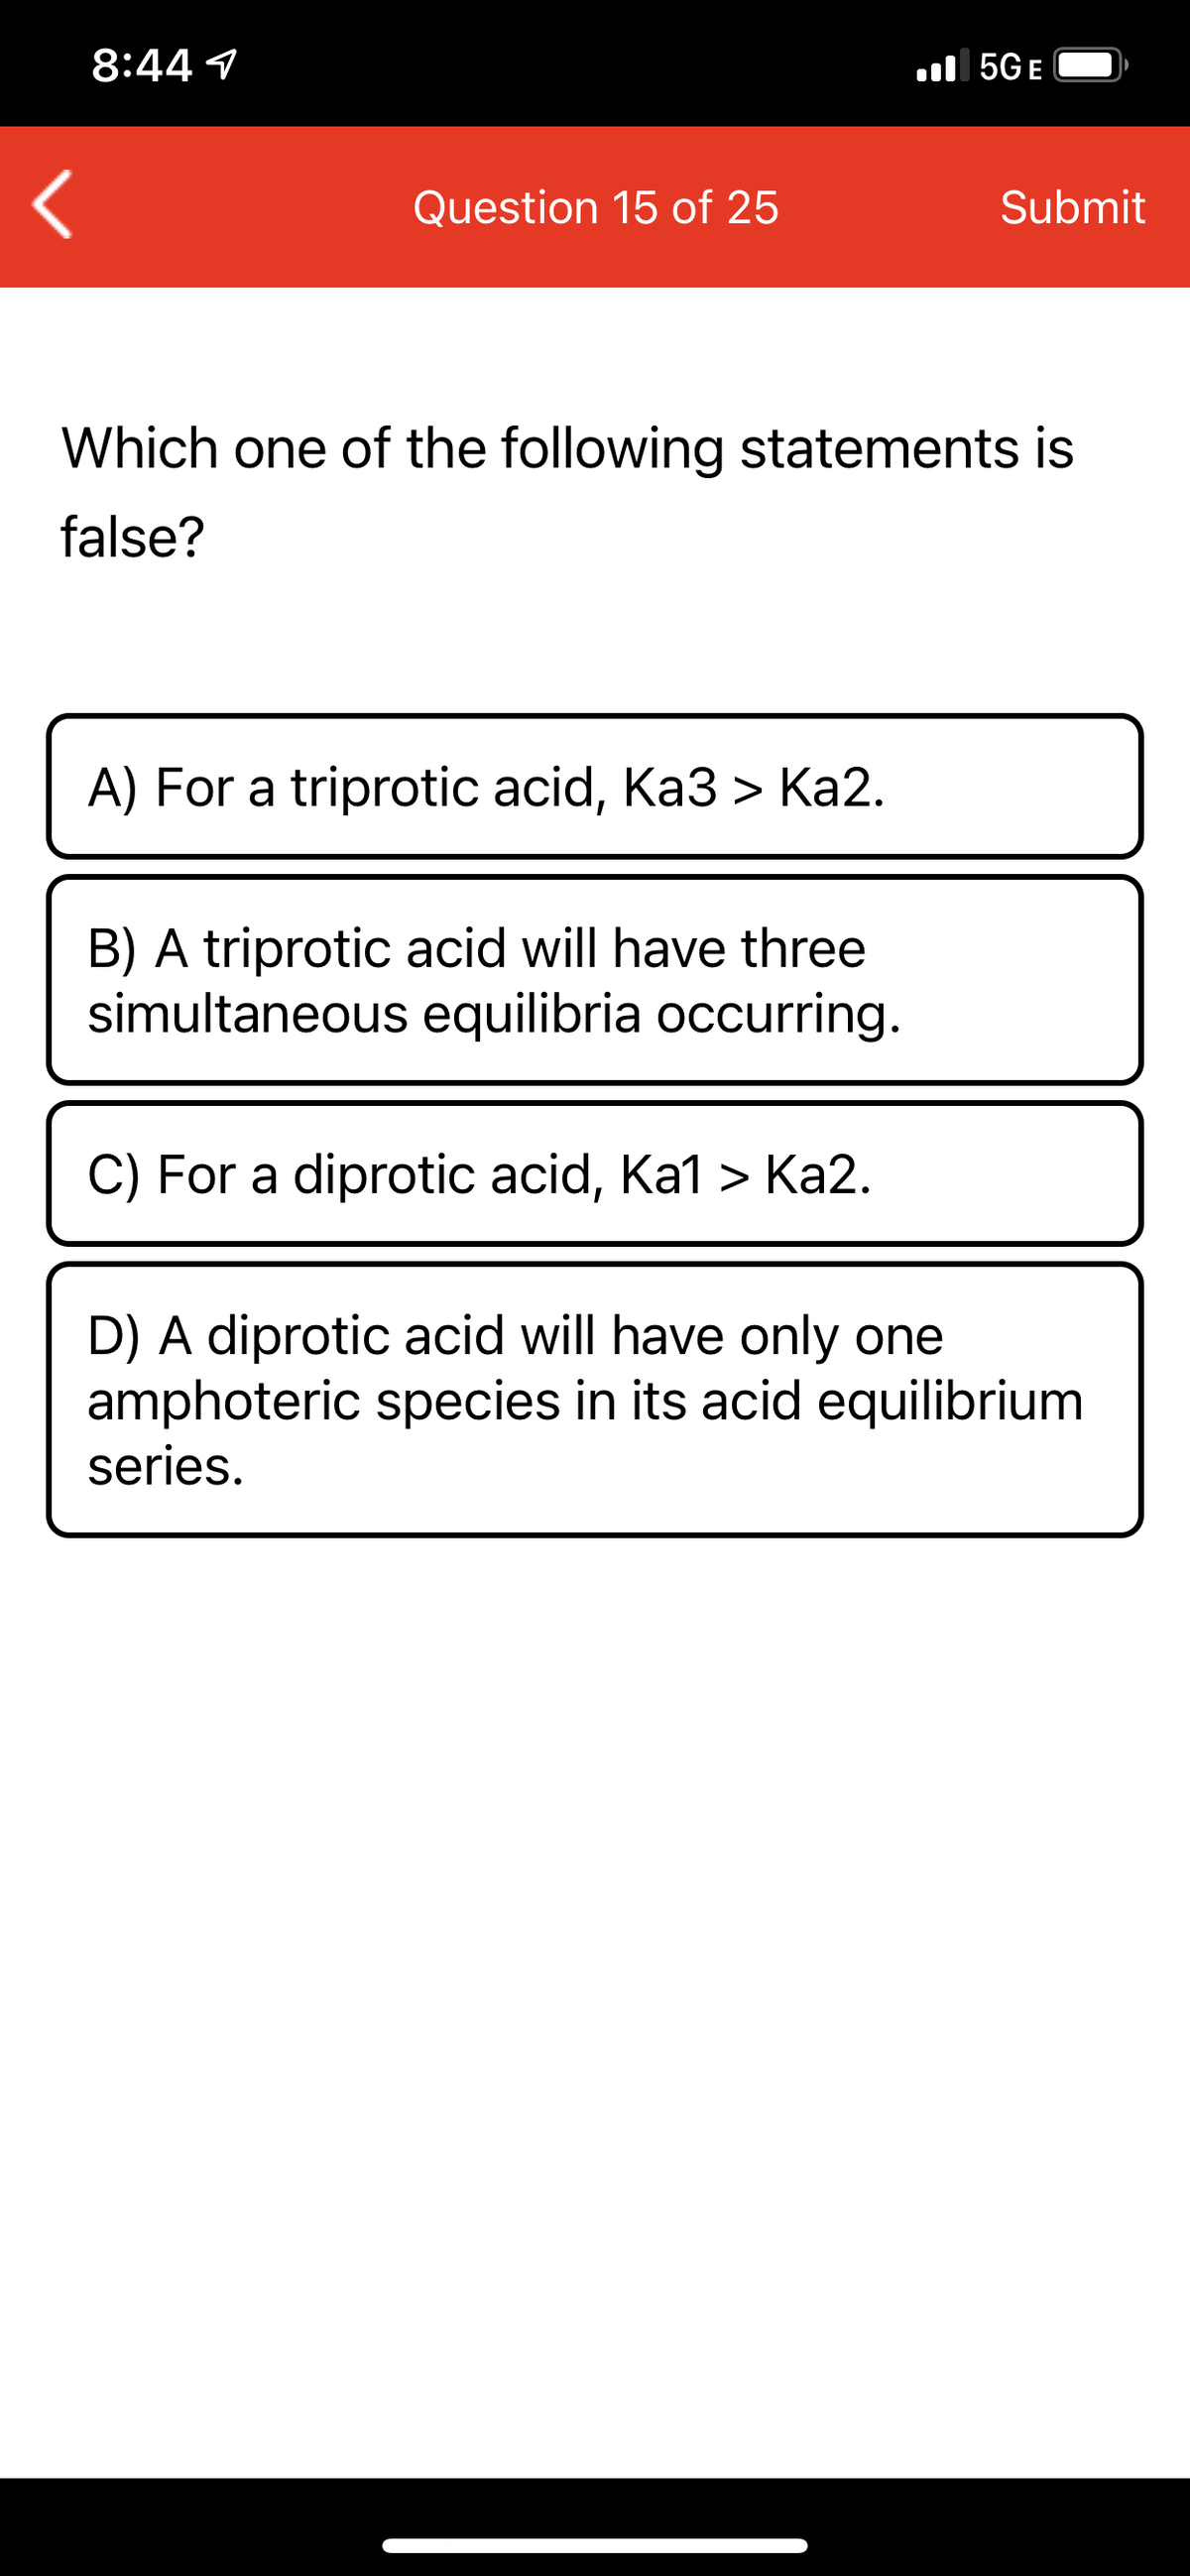 8:44 1
ll 5GE
Question 15 of 25
Submit
Which one of the following statements is
false?
A) For a triprotic acid, Ka3 > Ka2.
B) A triprotic acid will have three
simultaneous equilibria occurring.
C) For a diprotic acid, Ka1 > Ka2.
D) A diprotic acid will have only one
amphoteric species in its acid equilibrium
series.
